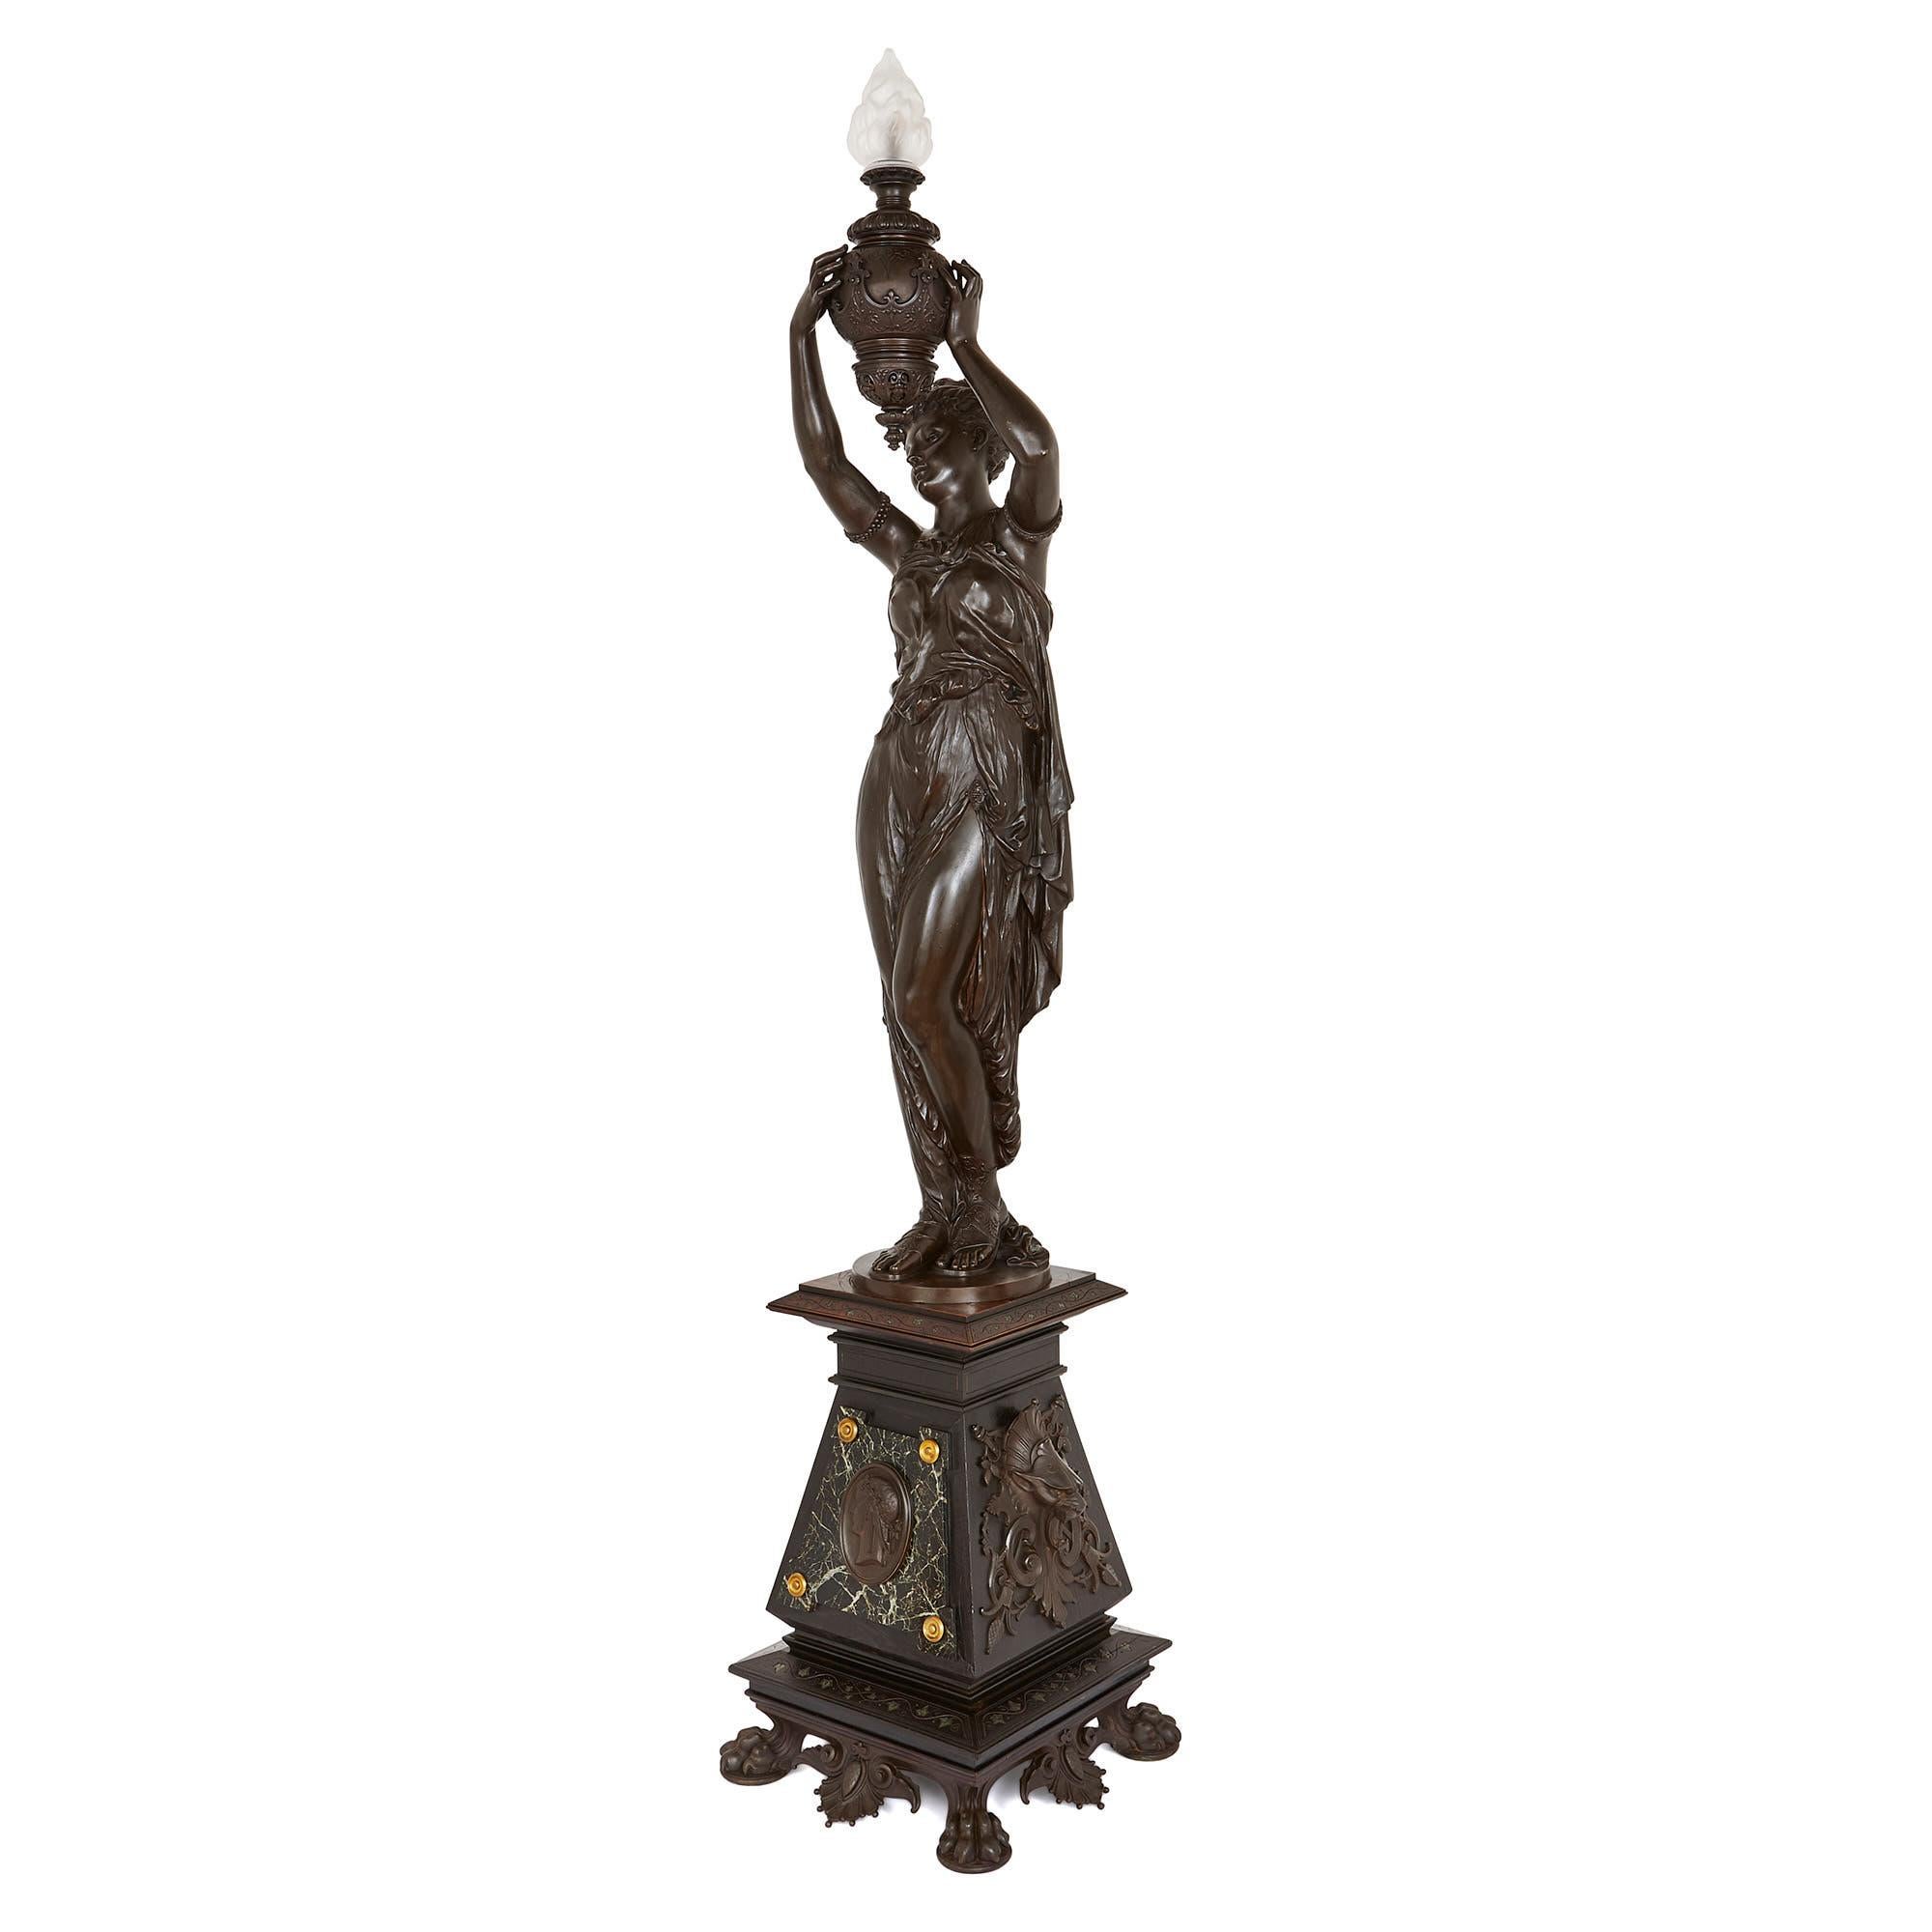 This beautiful piece consists of a patinated bronze female figure holding an urn with a glass flame, which serves as a lamp, all standing on a tall and finely decorated wooden plinth. 

The plinth is crafted from ebonized wood, set on a slim